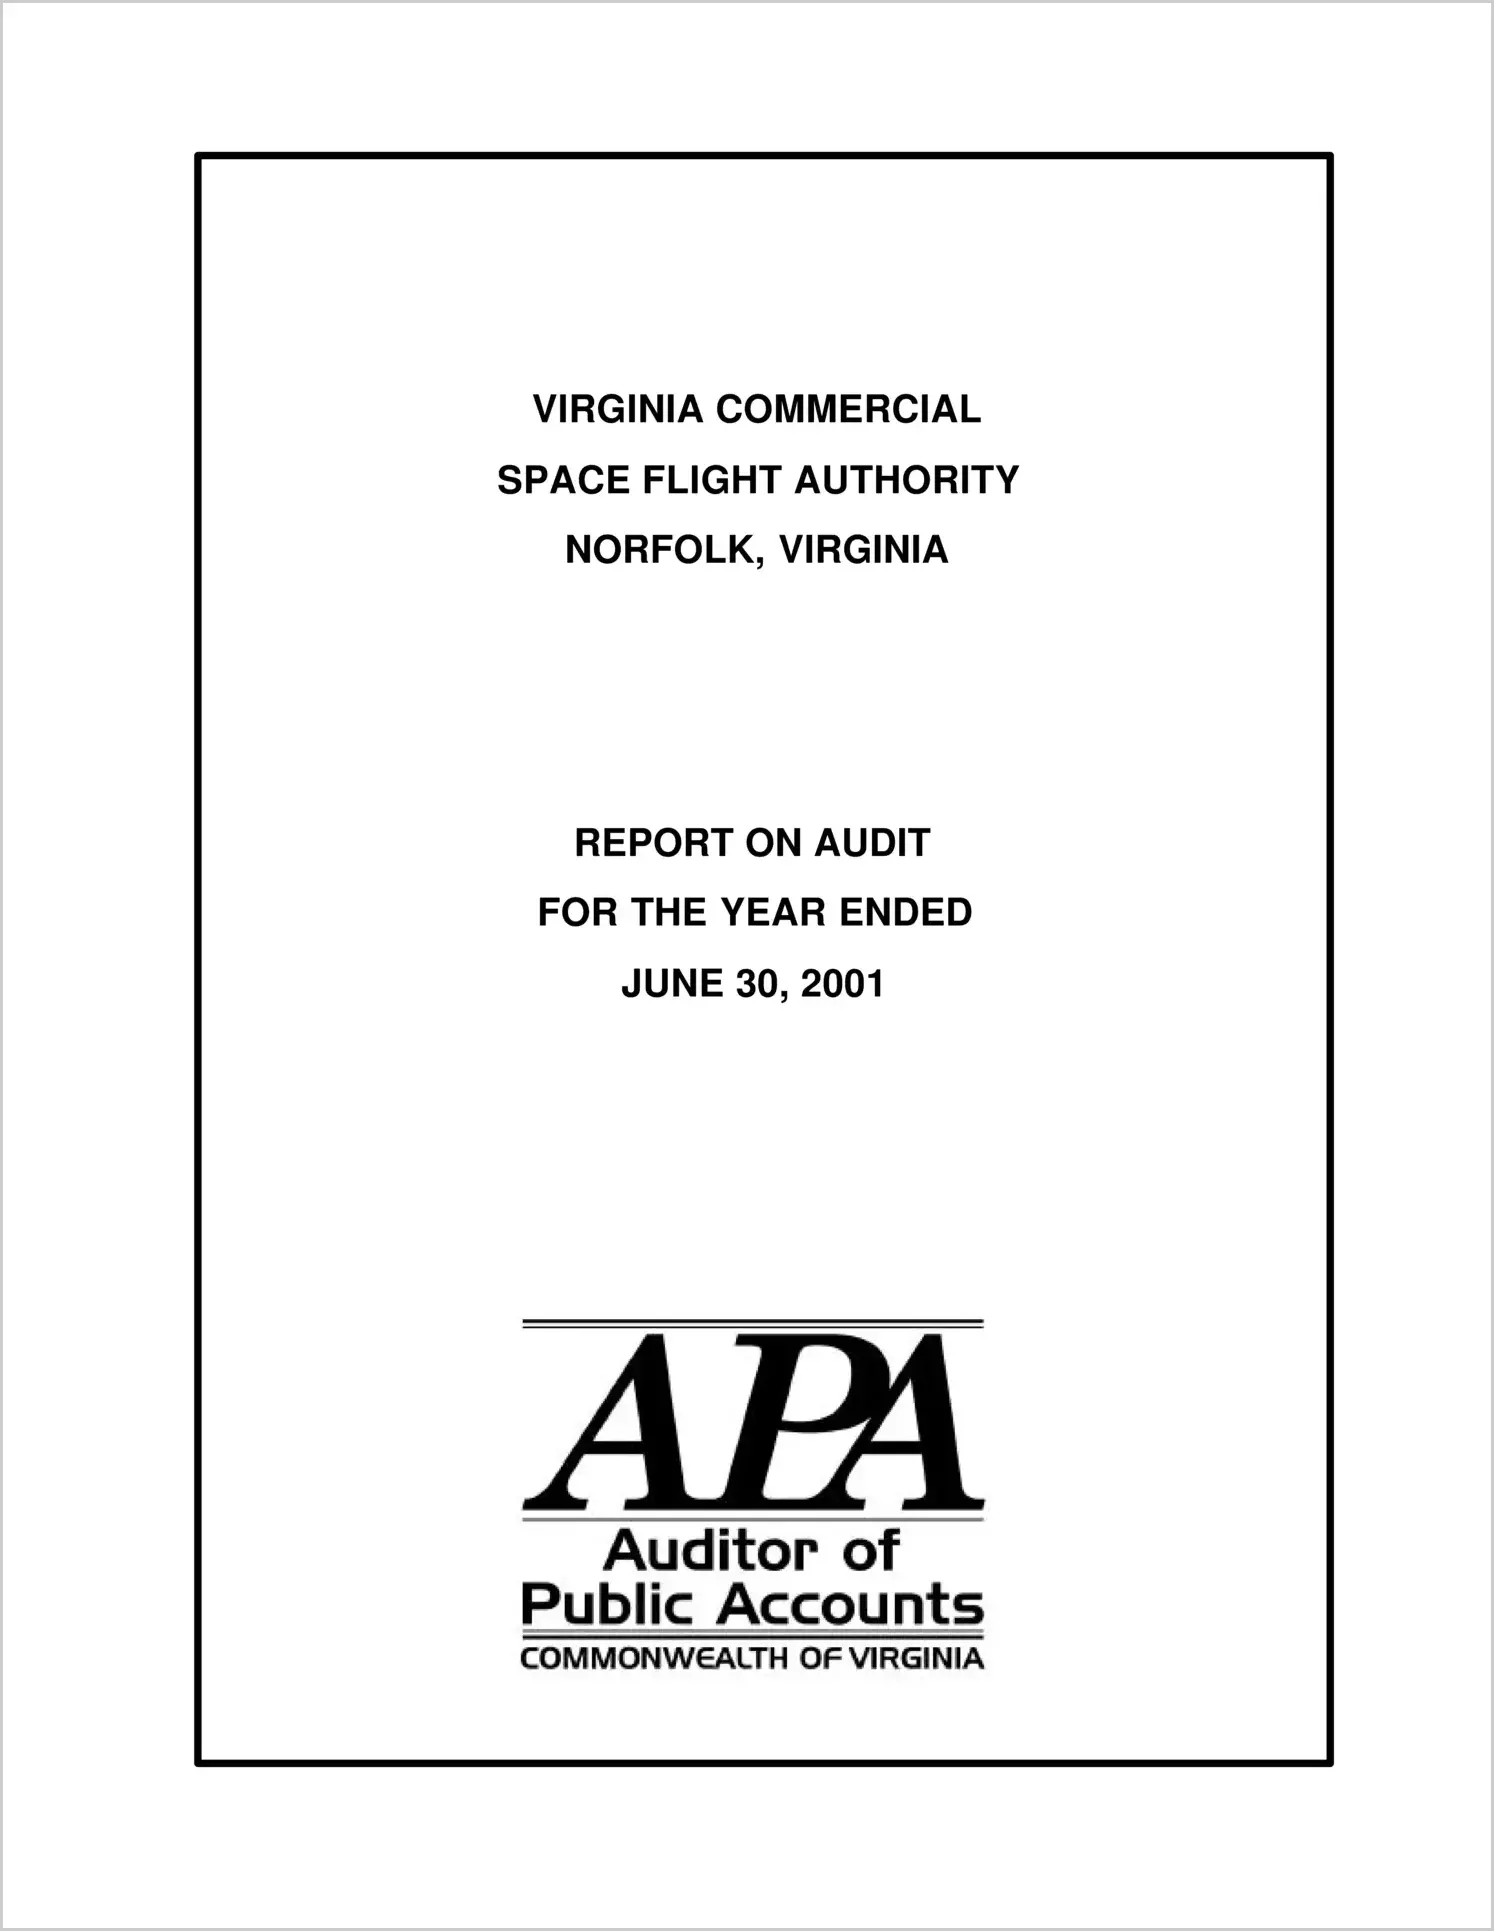 Virginia Commercial Space Flight Authority for the year ended June 30, 2001